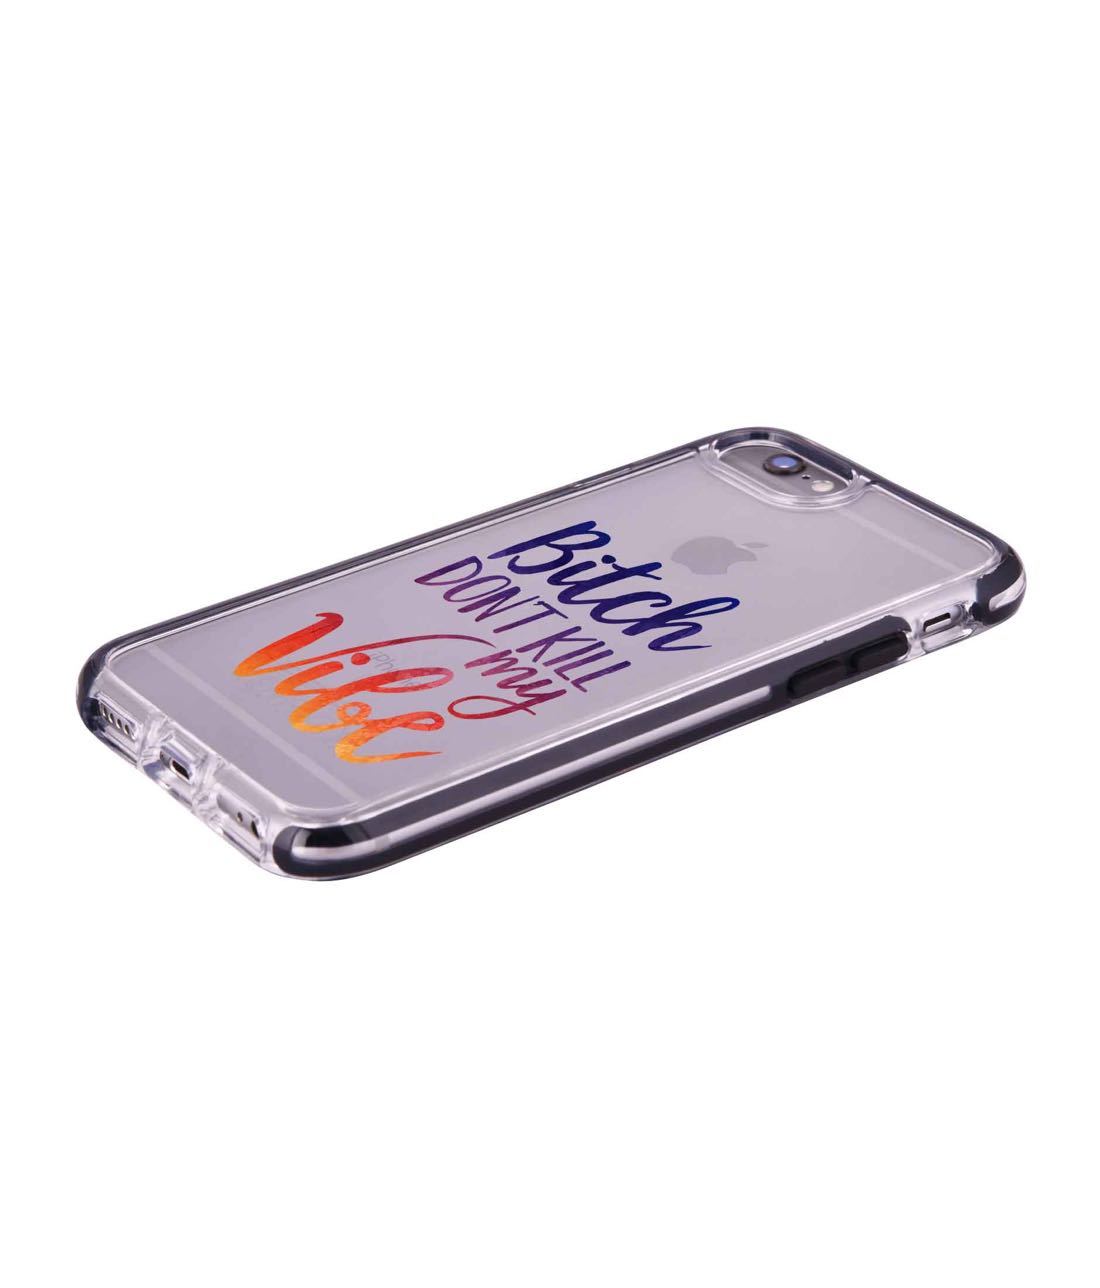 Dont kill my Vibe - Extreme Phone Case for iPhone 6S